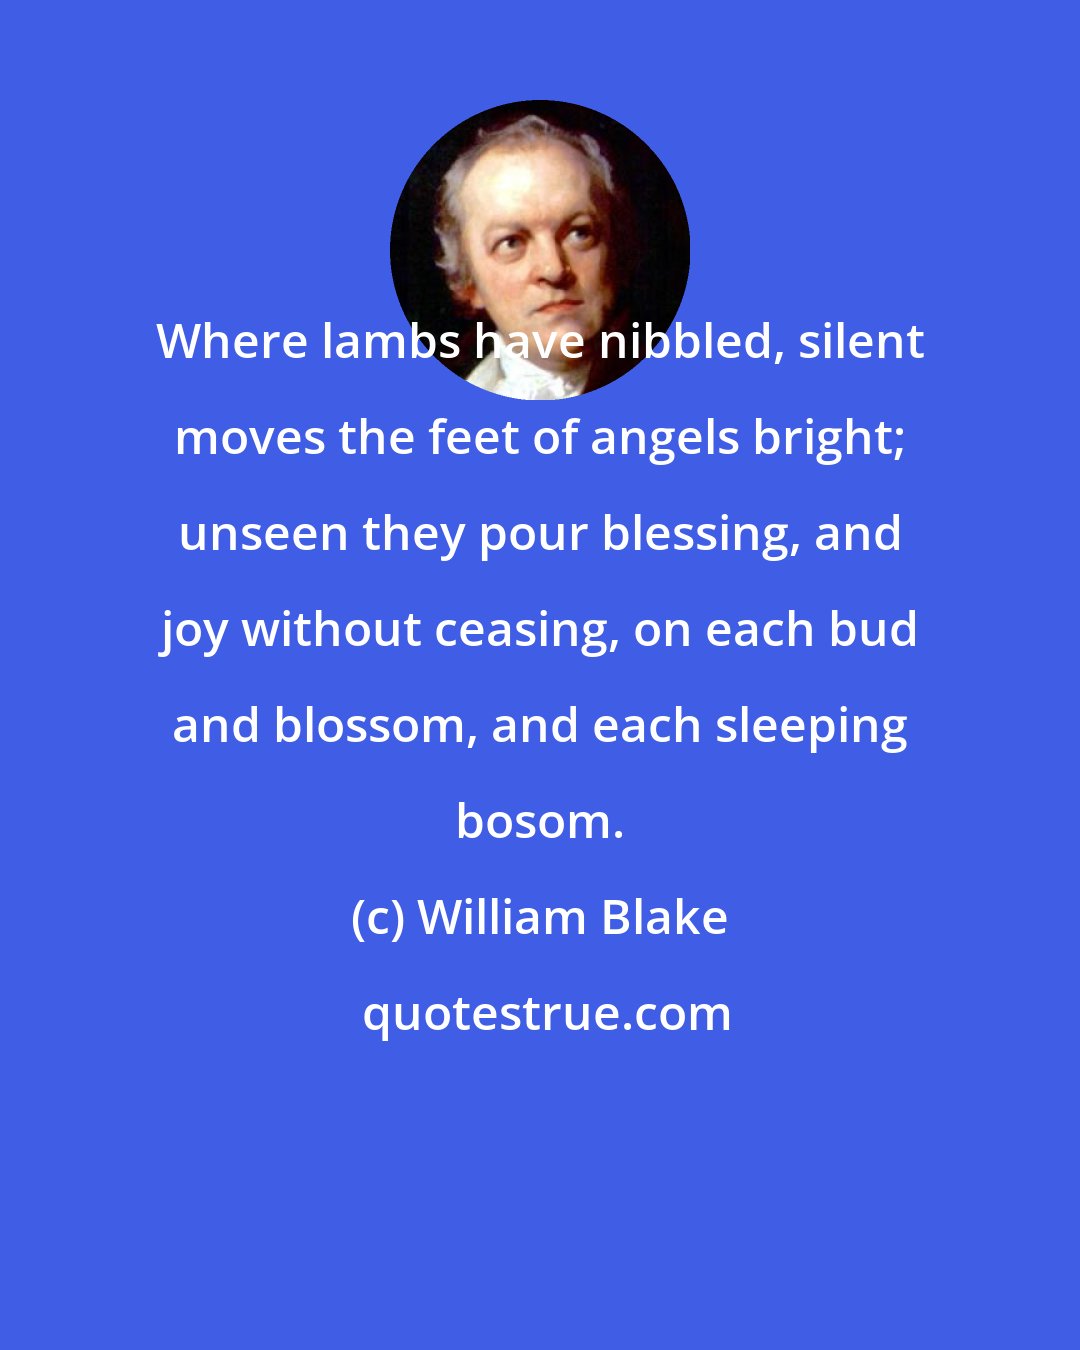 William Blake: Where lambs have nibbled, silent moves the feet of angels bright; unseen they pour blessing, and joy without ceasing, on each bud and blossom, and each sleeping bosom.